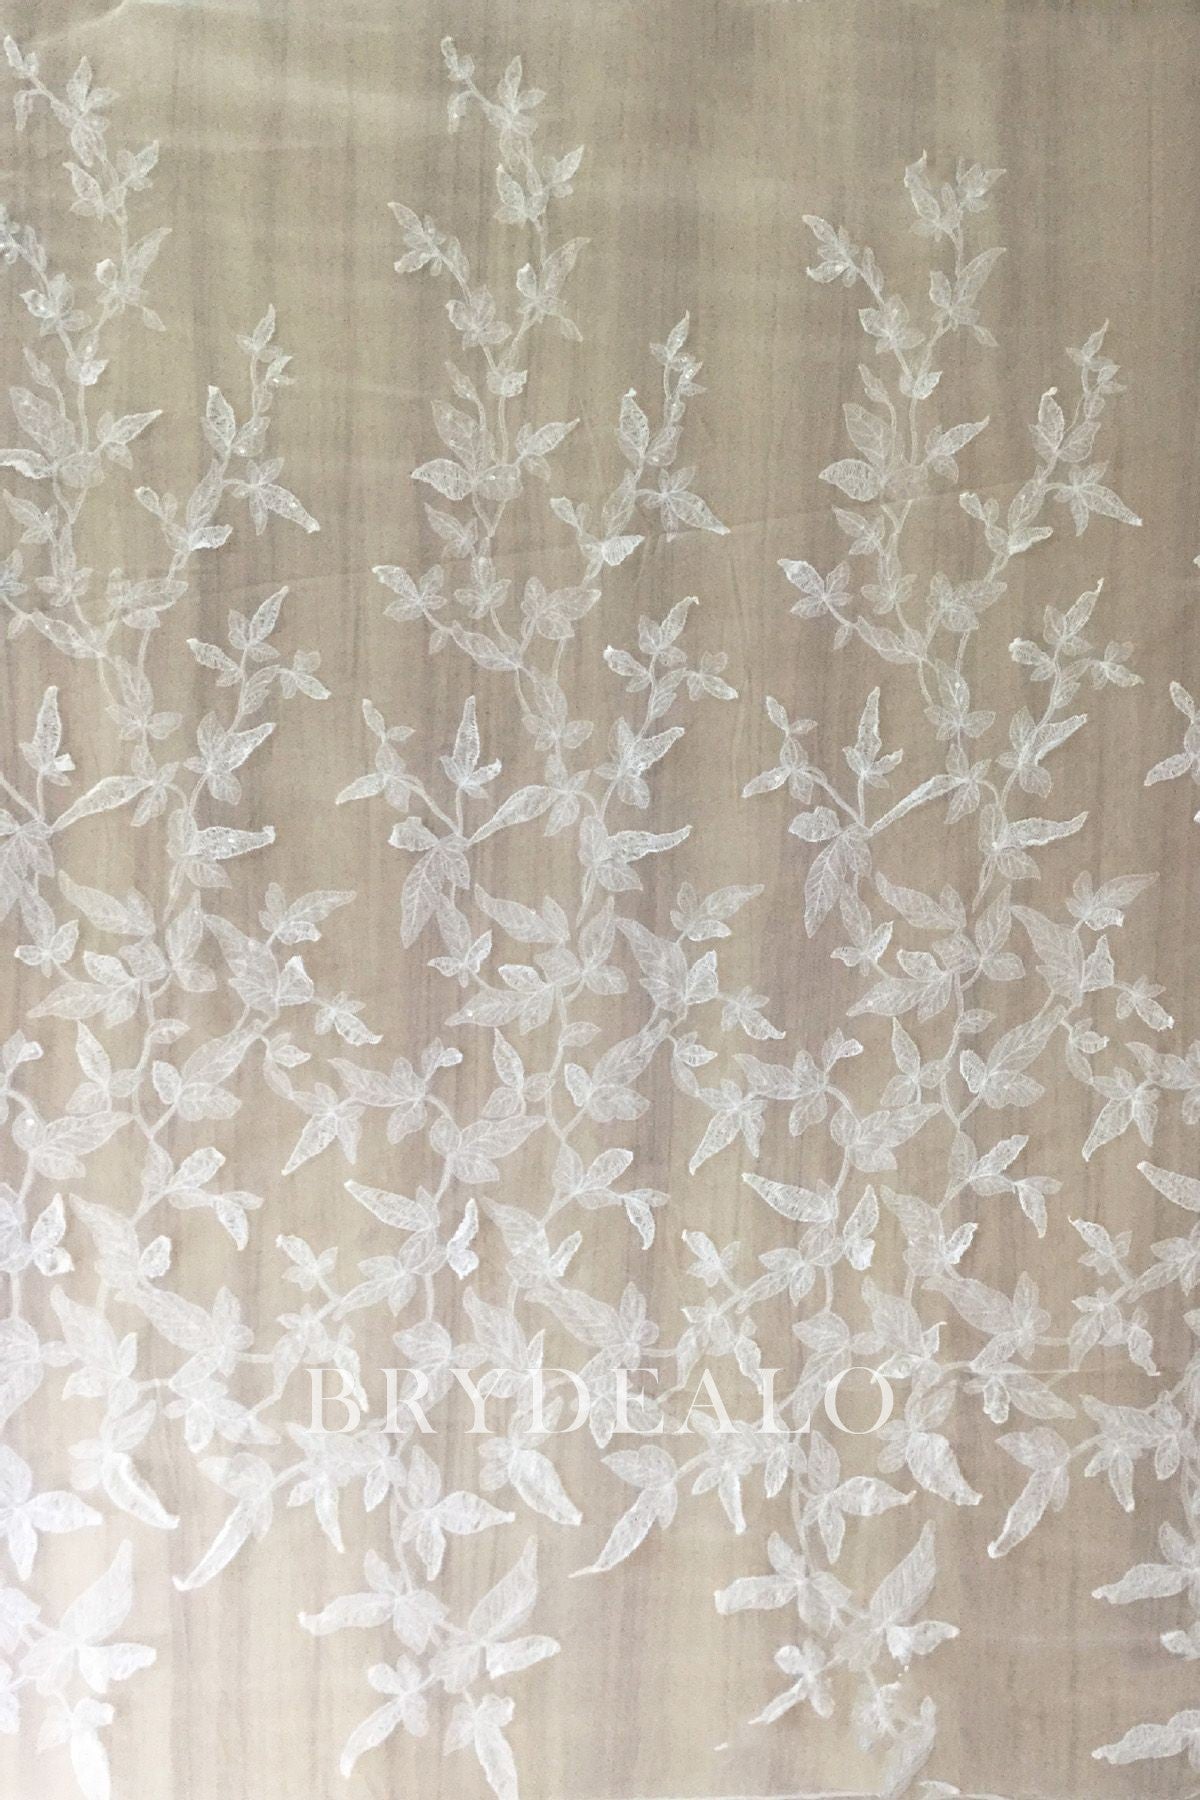 Shimmery Embossed Leaf  Lace Fabric